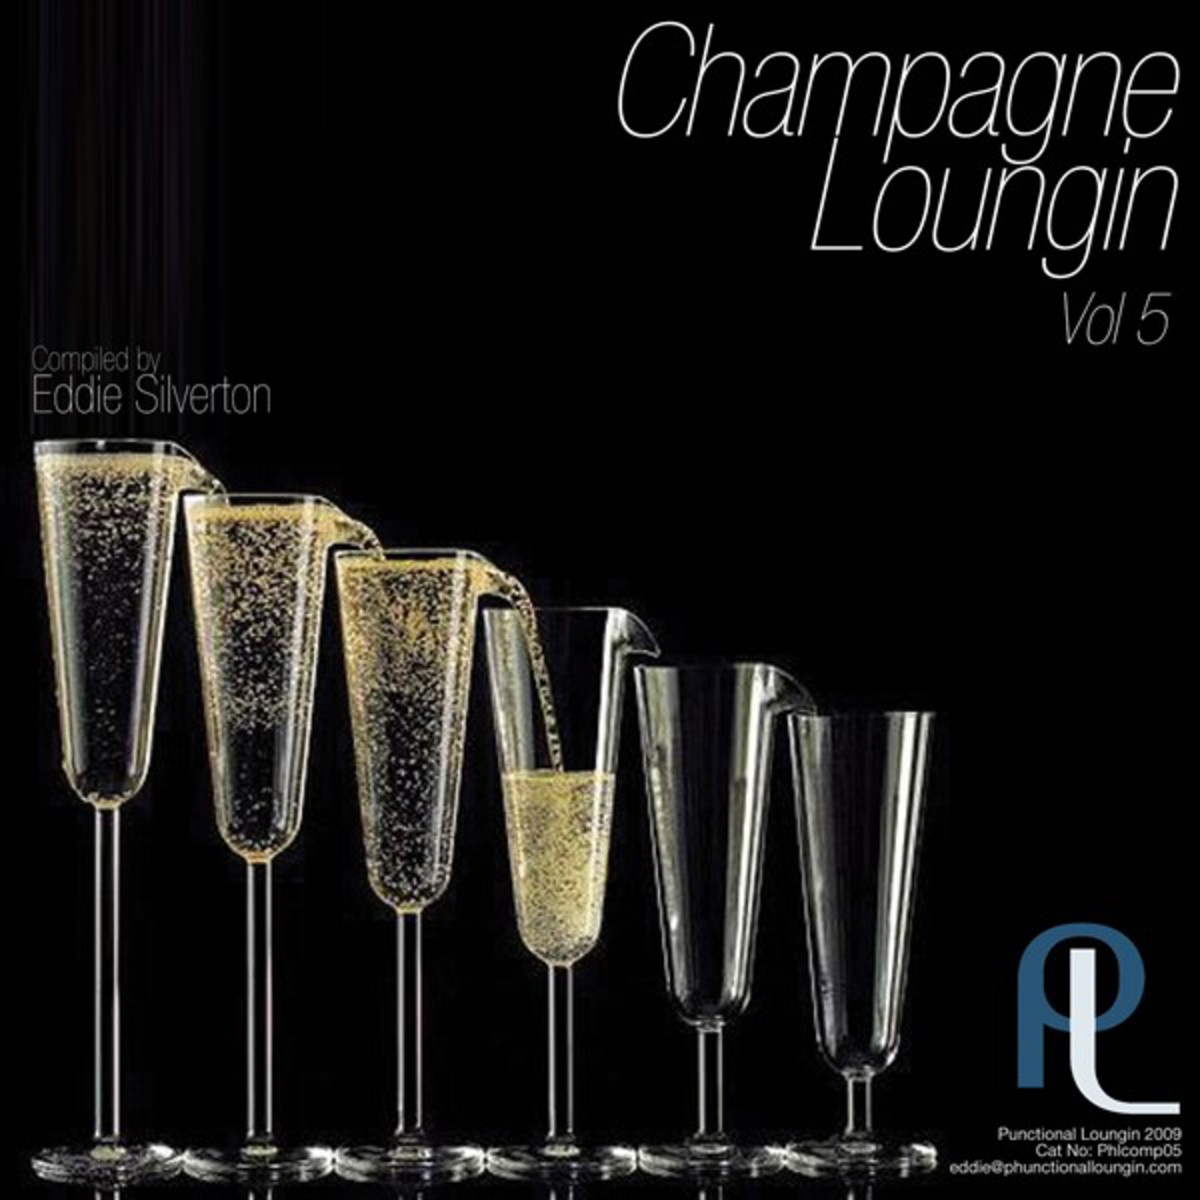 Champagne Loungin Volume 5 (continuous mix by Eddie Silverton)